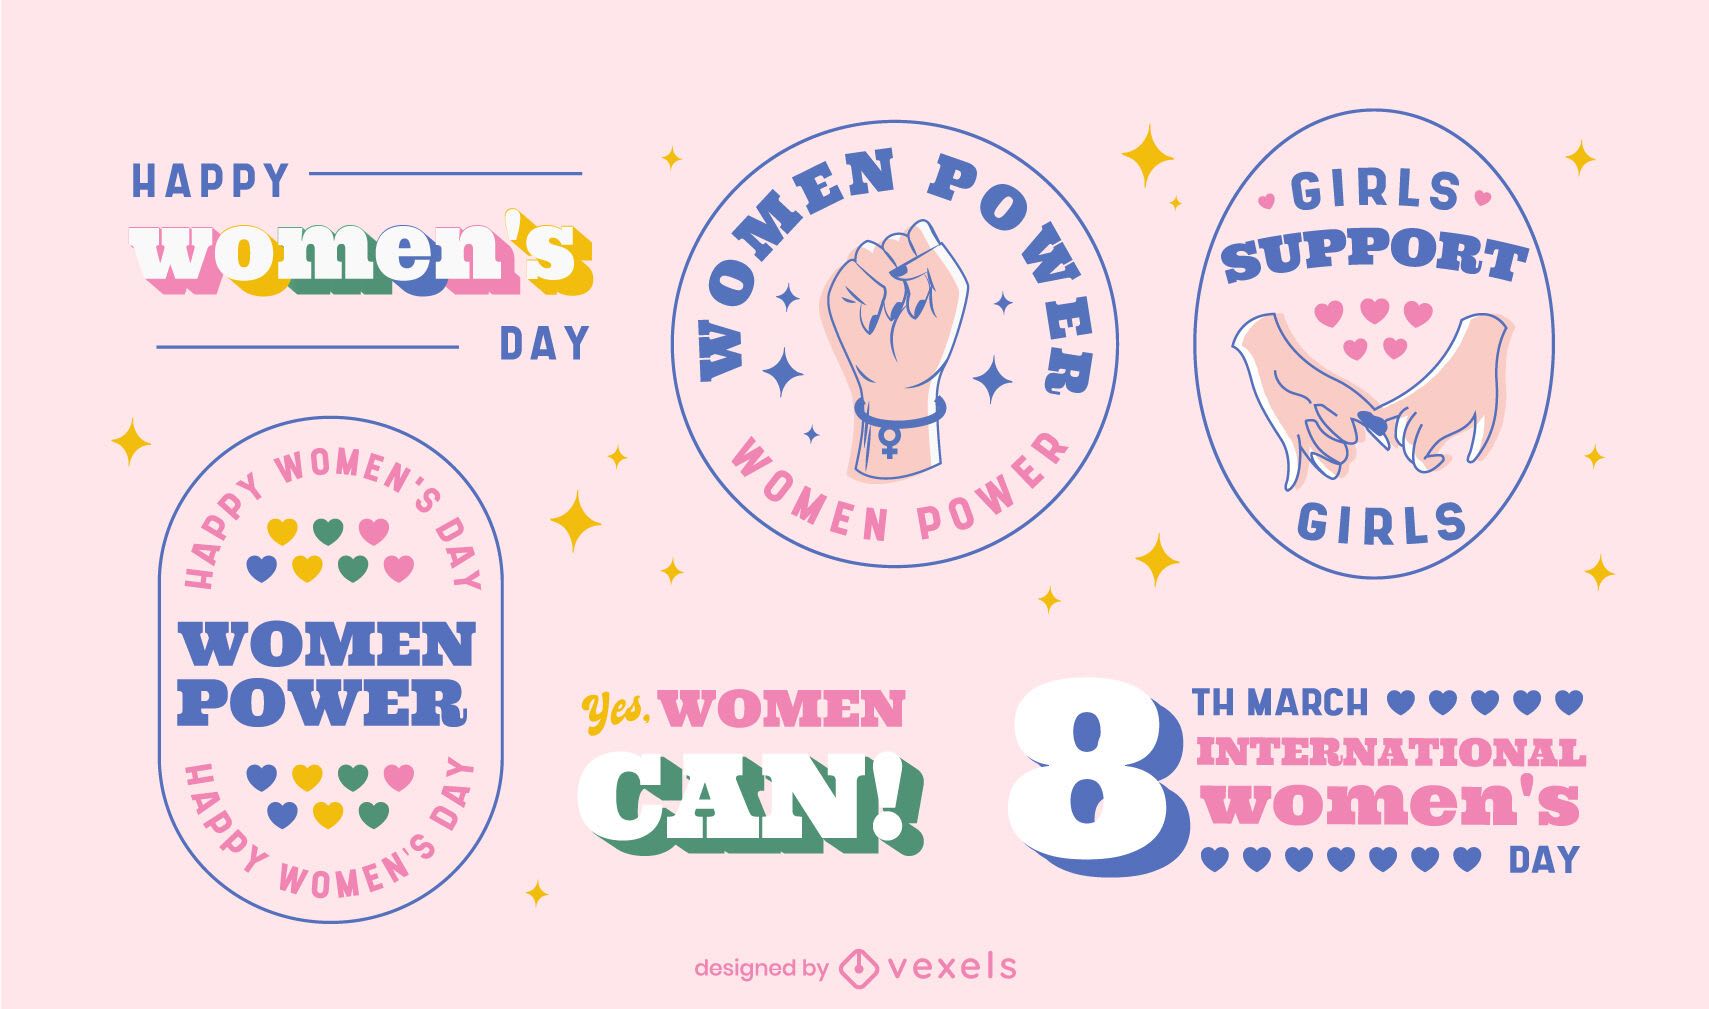 With International Women's Day Close-by, it's Time to Get Most Out of  Sales!